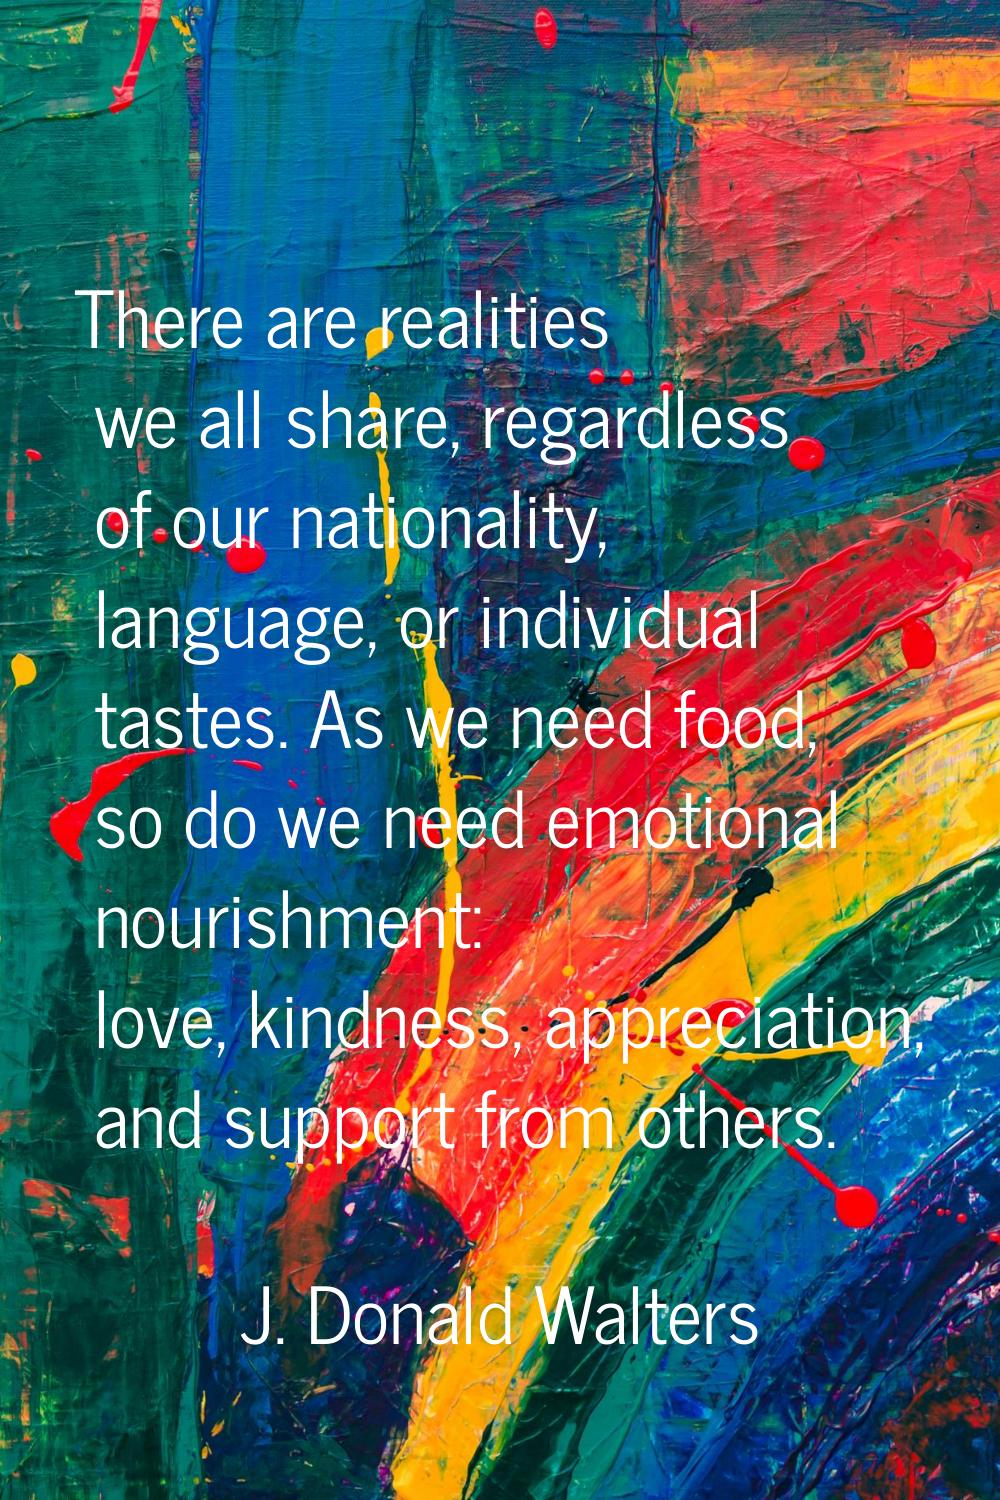 There are realities we all share, regardless of our nationality, language, or individual tastes. As